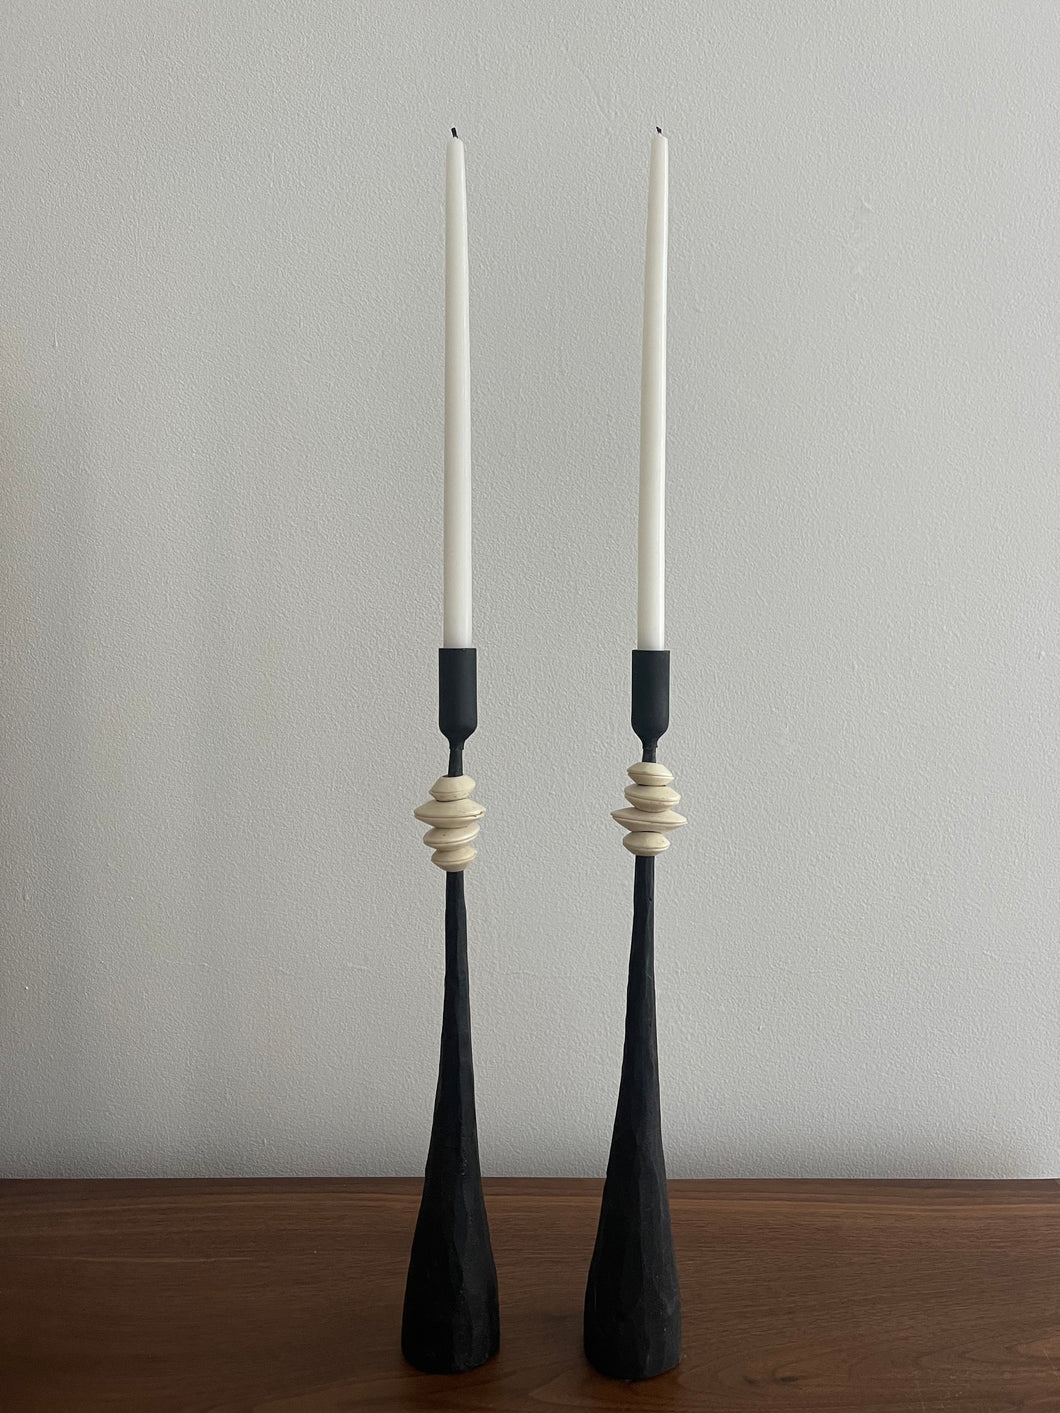 Wrought Iron Candle Holders with Neck Detail